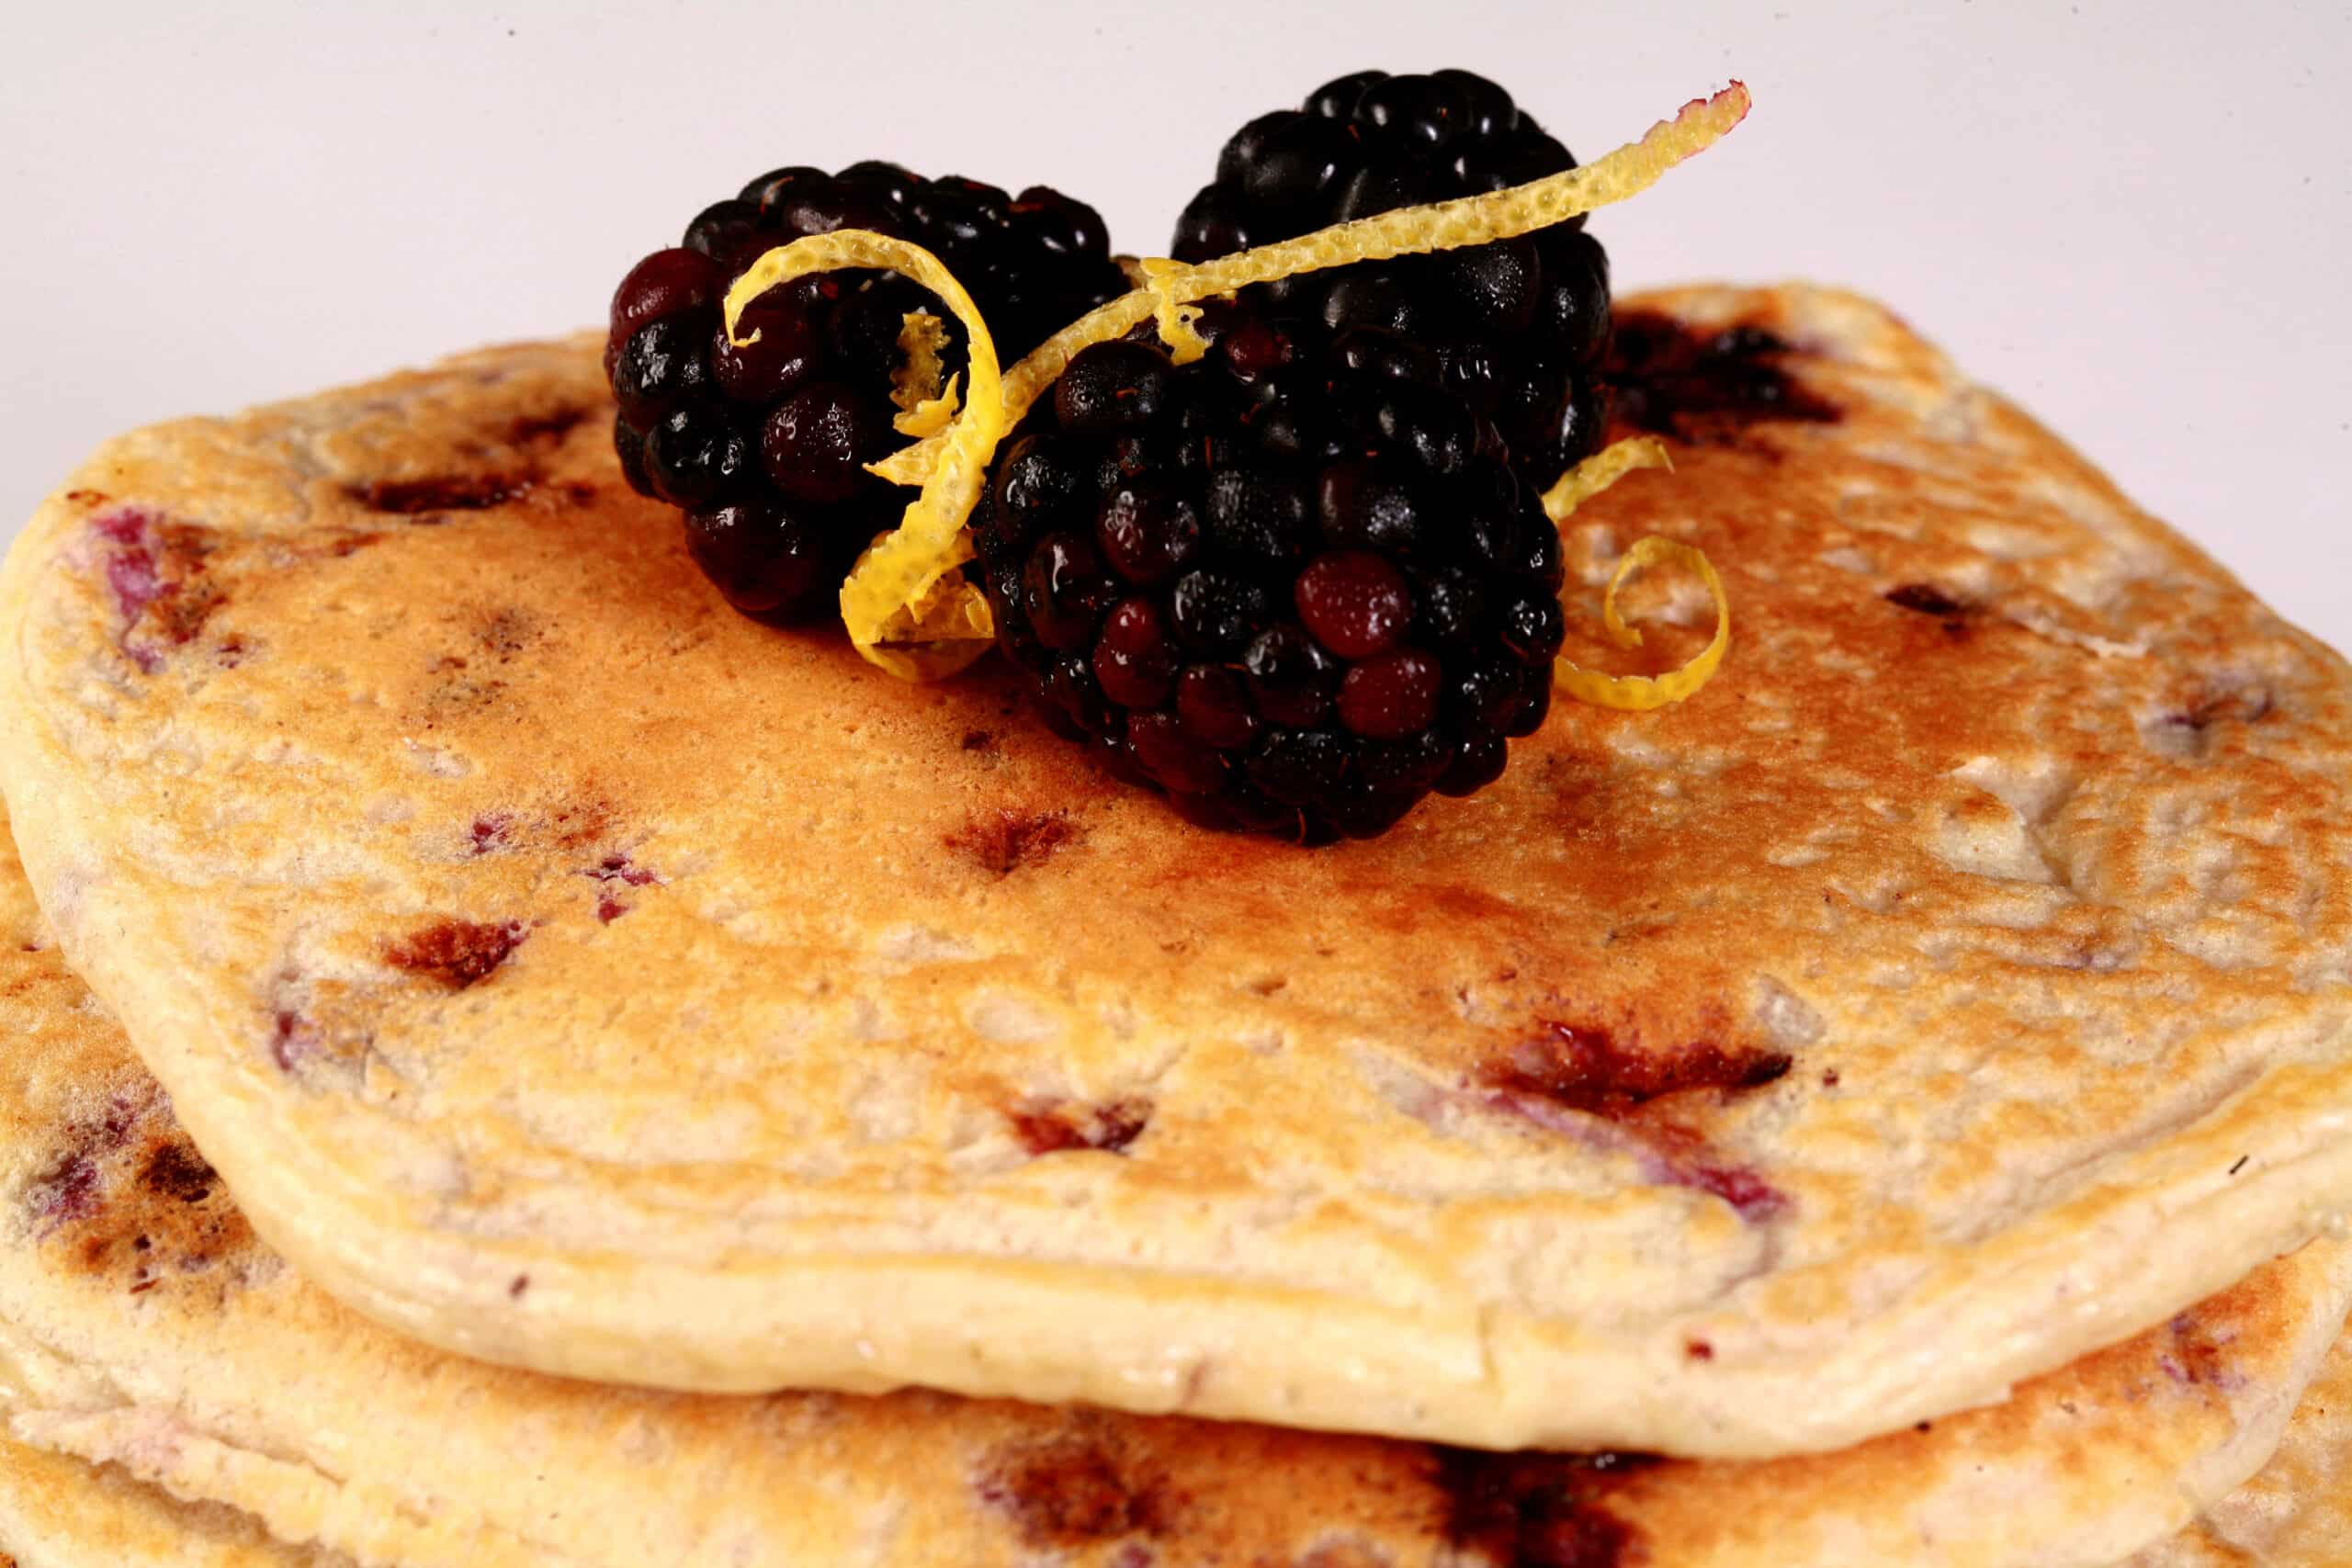 A stack of 6 keto blackberry pancakes with blackberries and lemon curls on top.